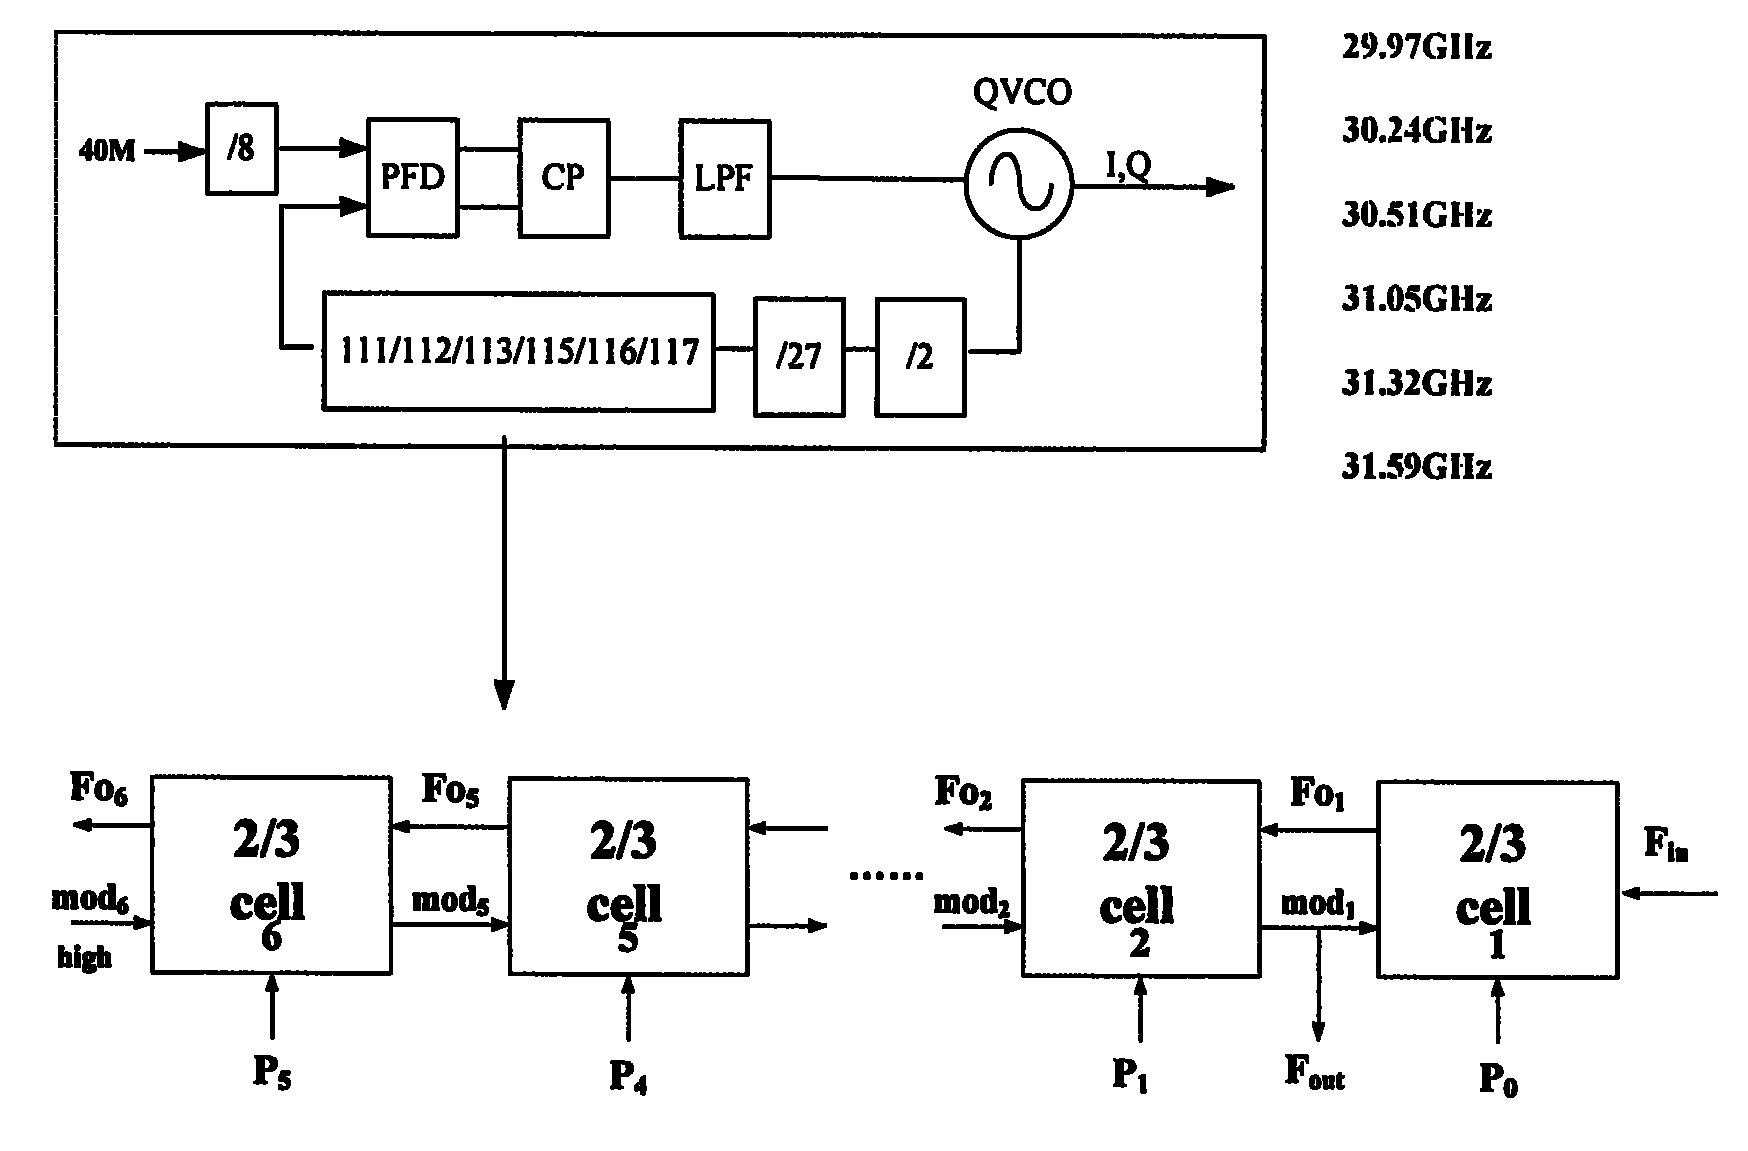 1:1 structural 40MHz crystal oscillator frequency synthesizer for 60GHz wireless communication